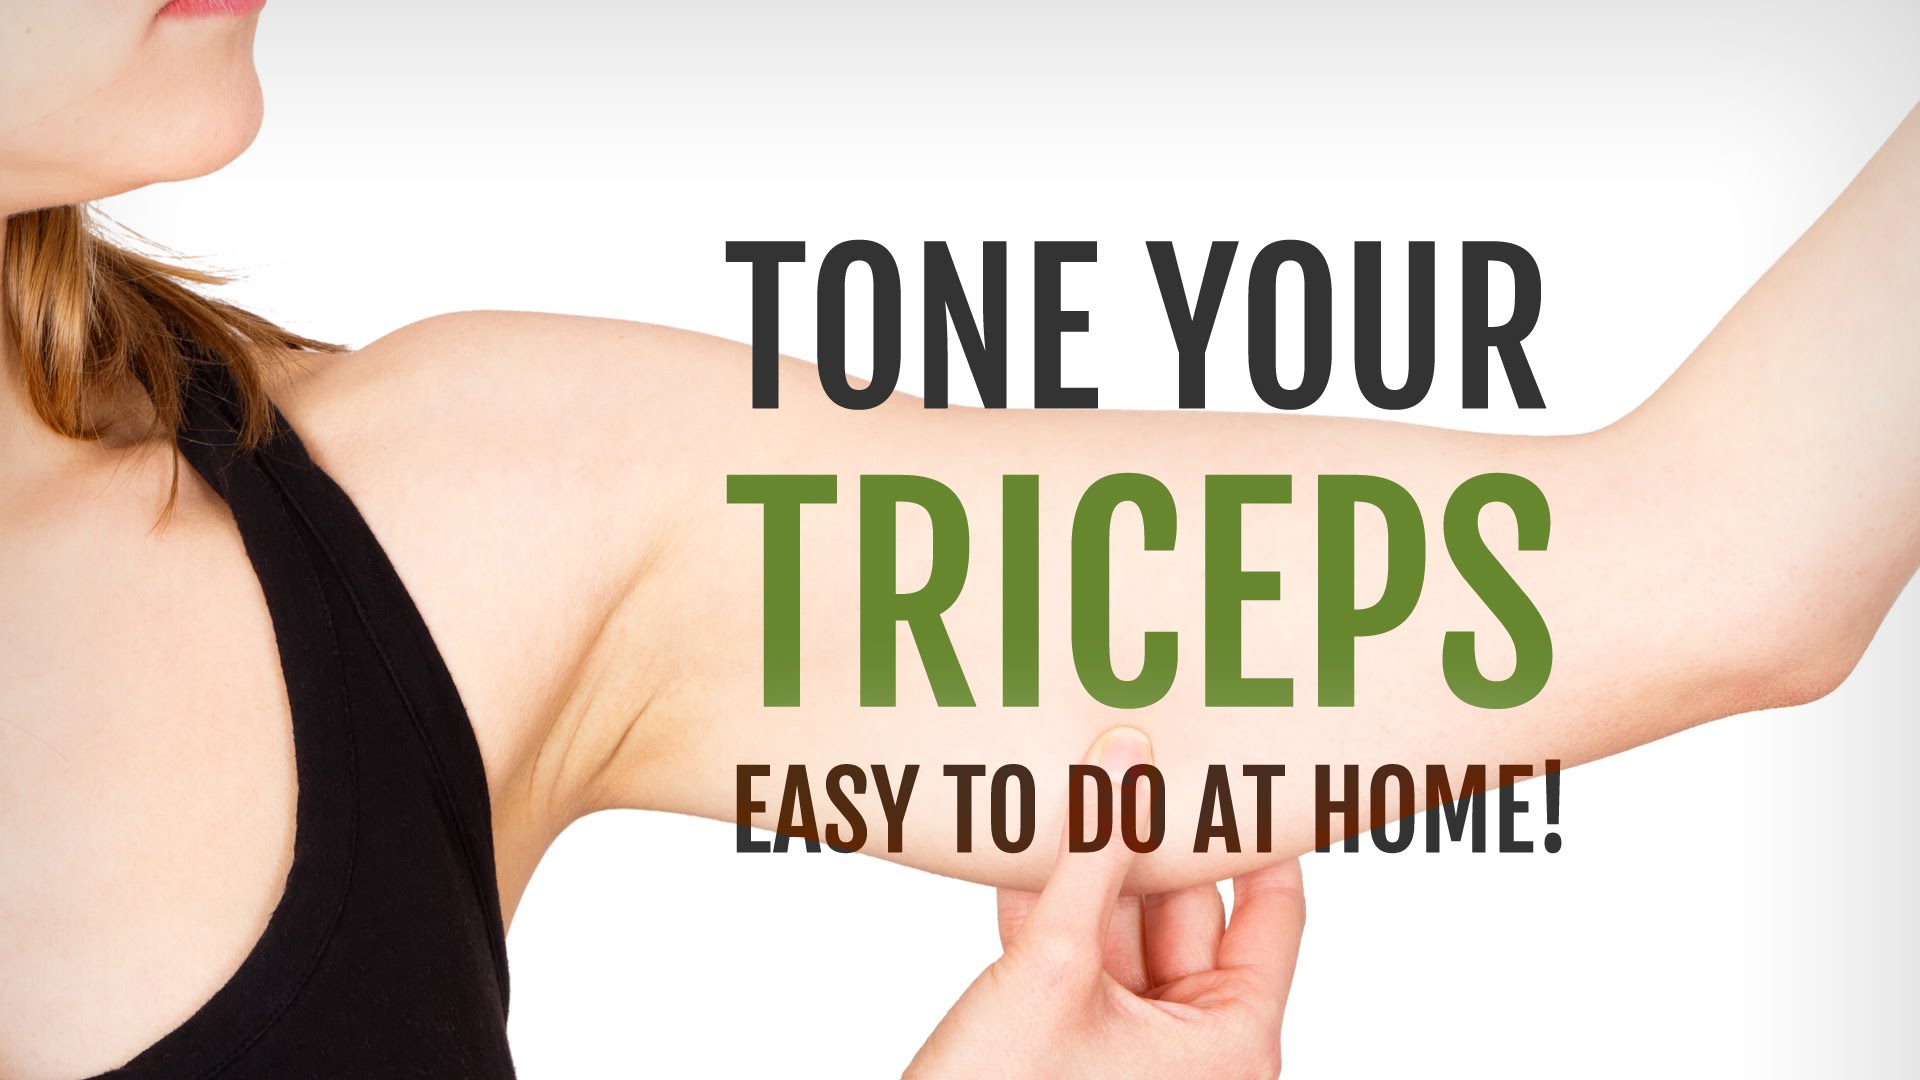 Toned Triceps “How to Tone Your Arms Without Weights” at home